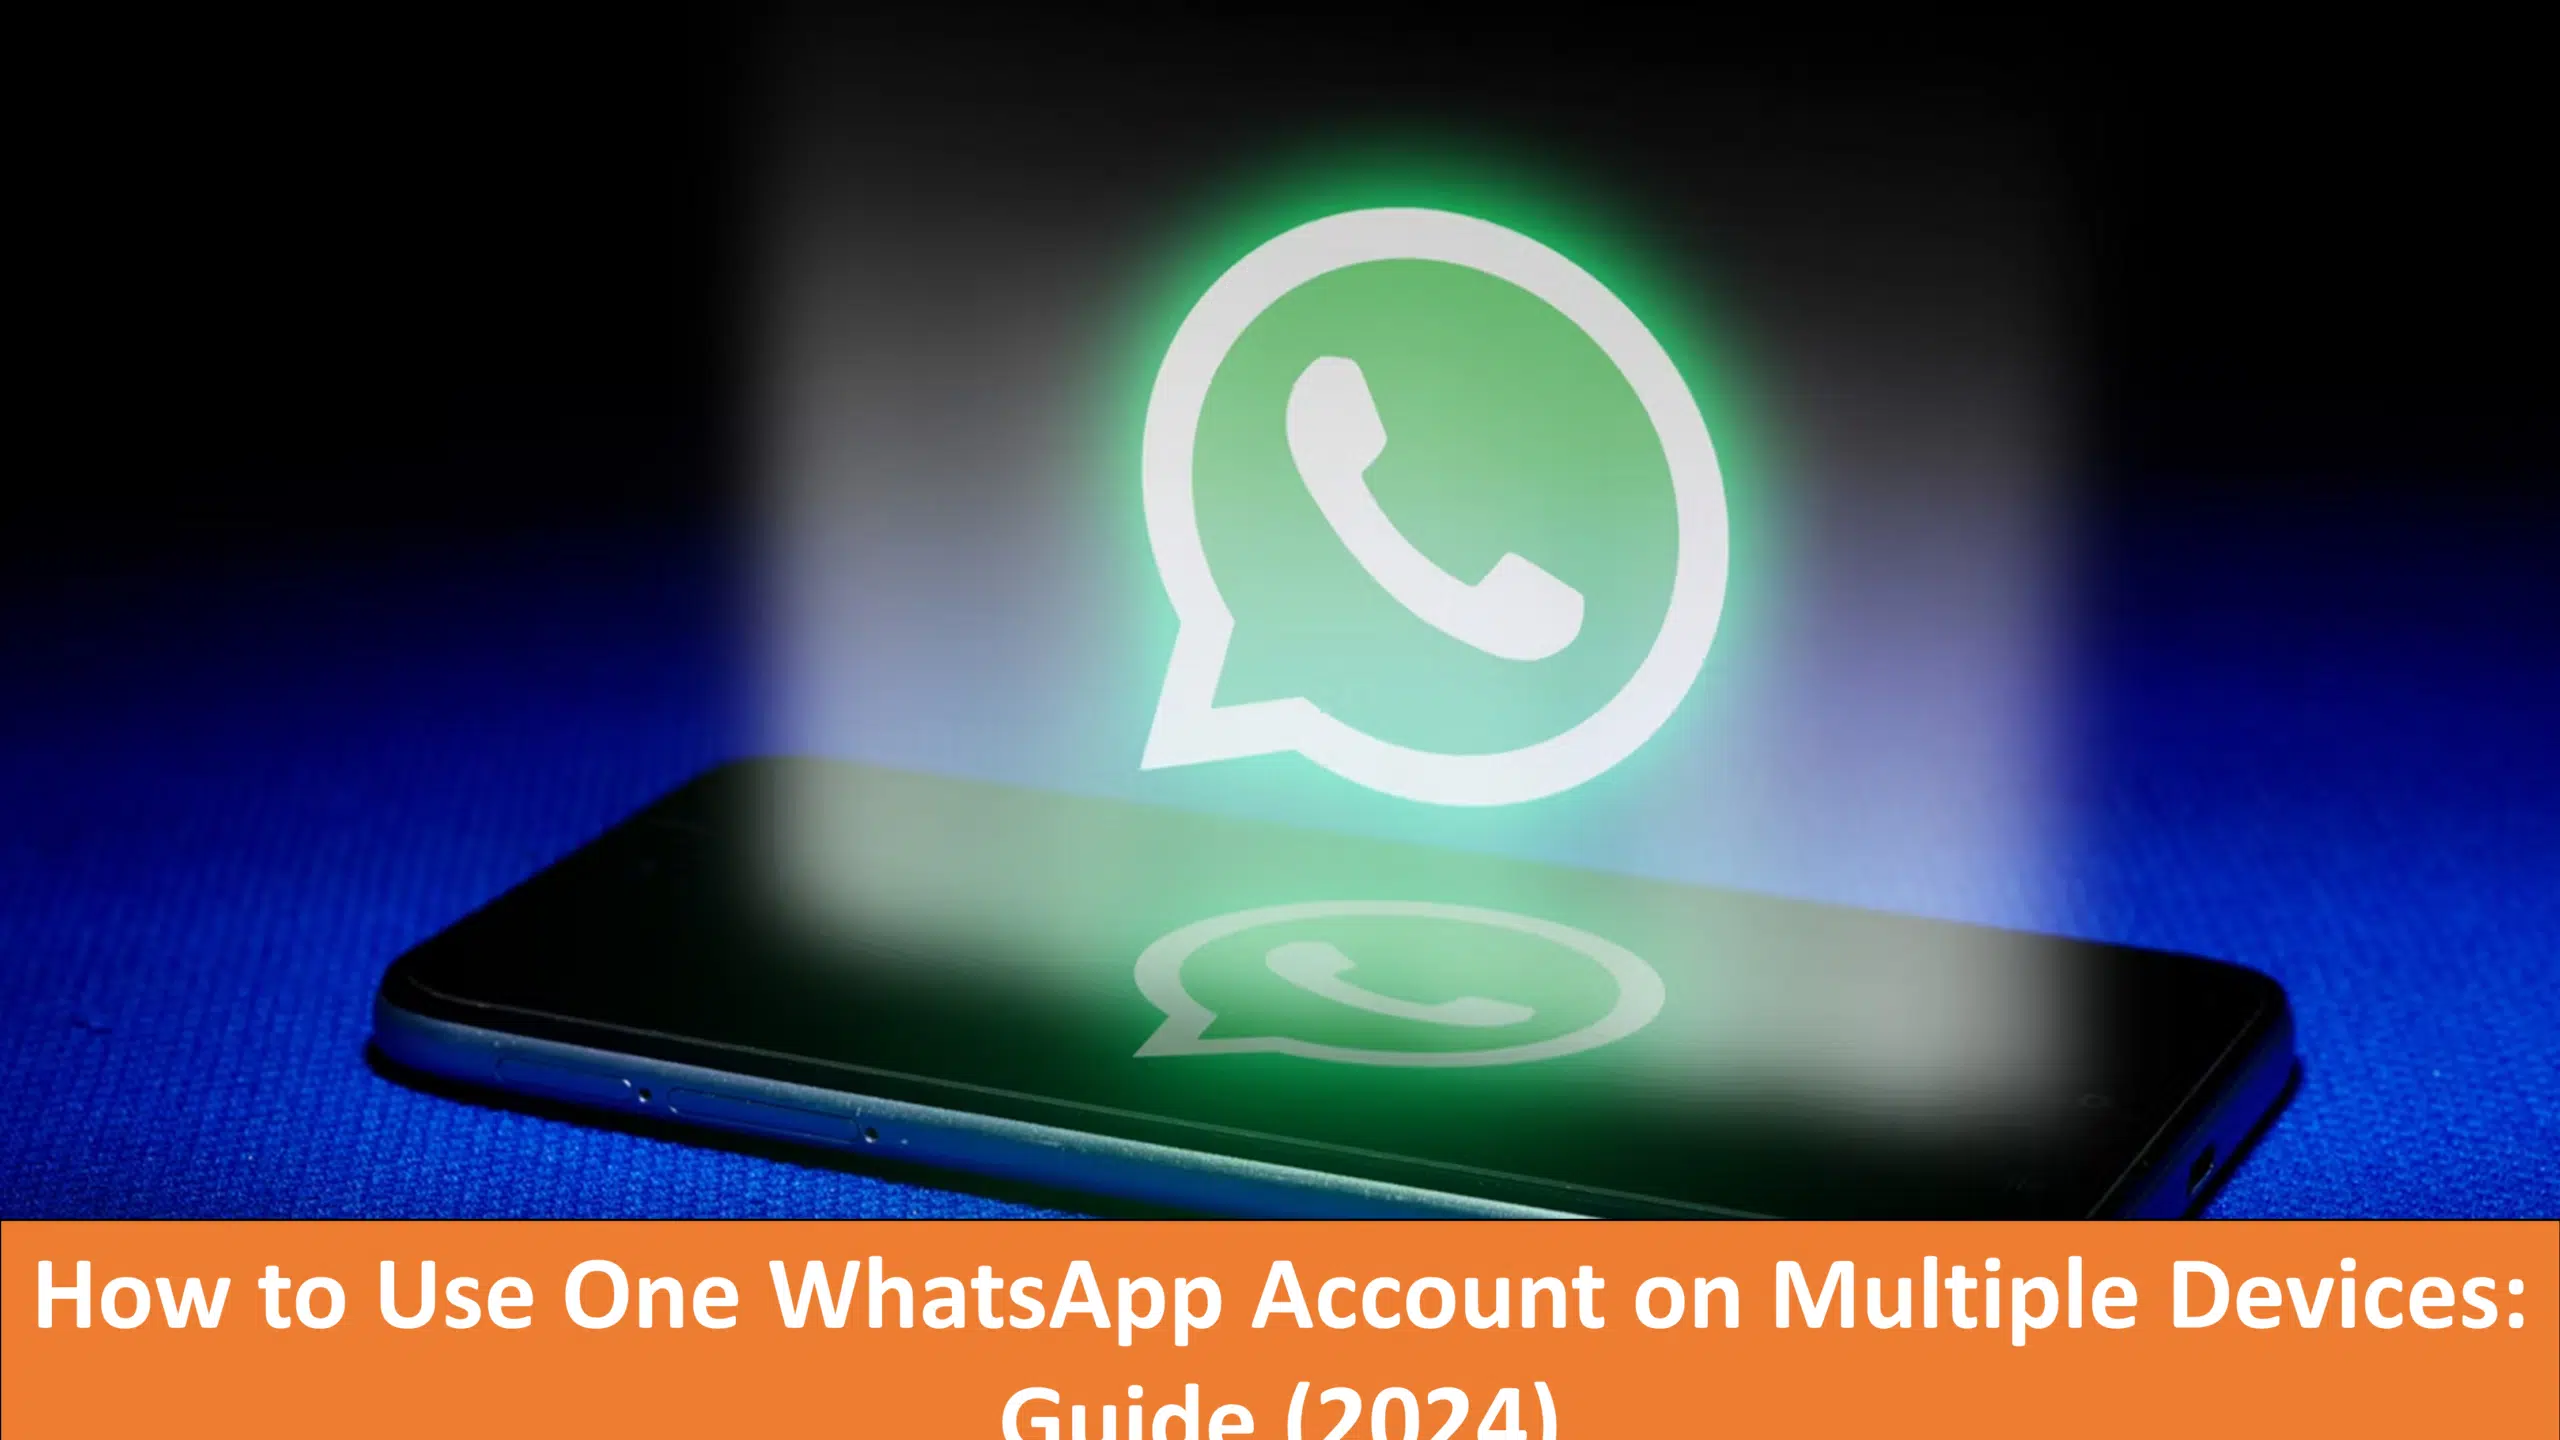 How to Use One WhatsApp Account on Multiple Devices: Guide (2024)